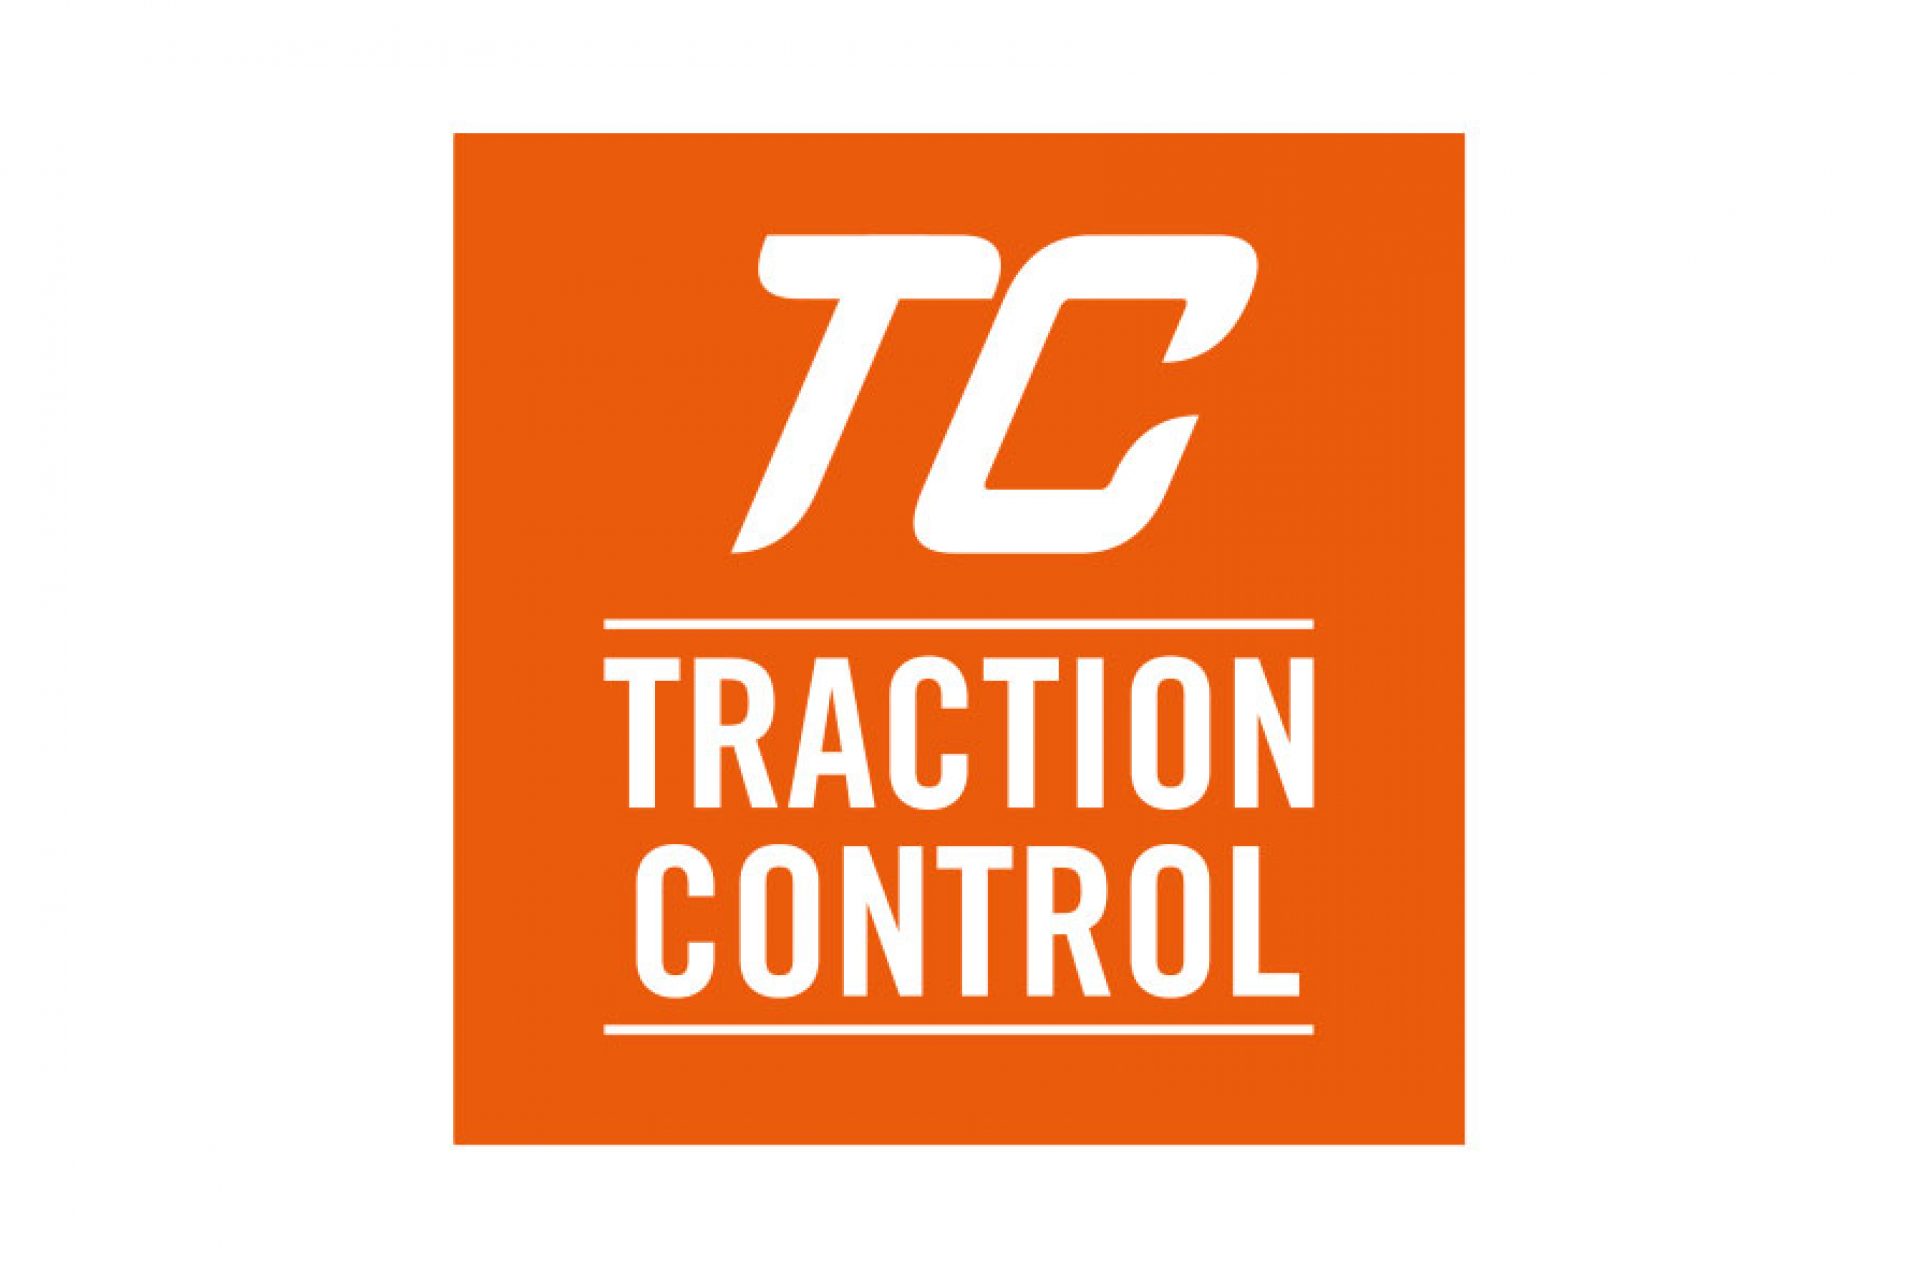 TRACTION CONTROL (TC)